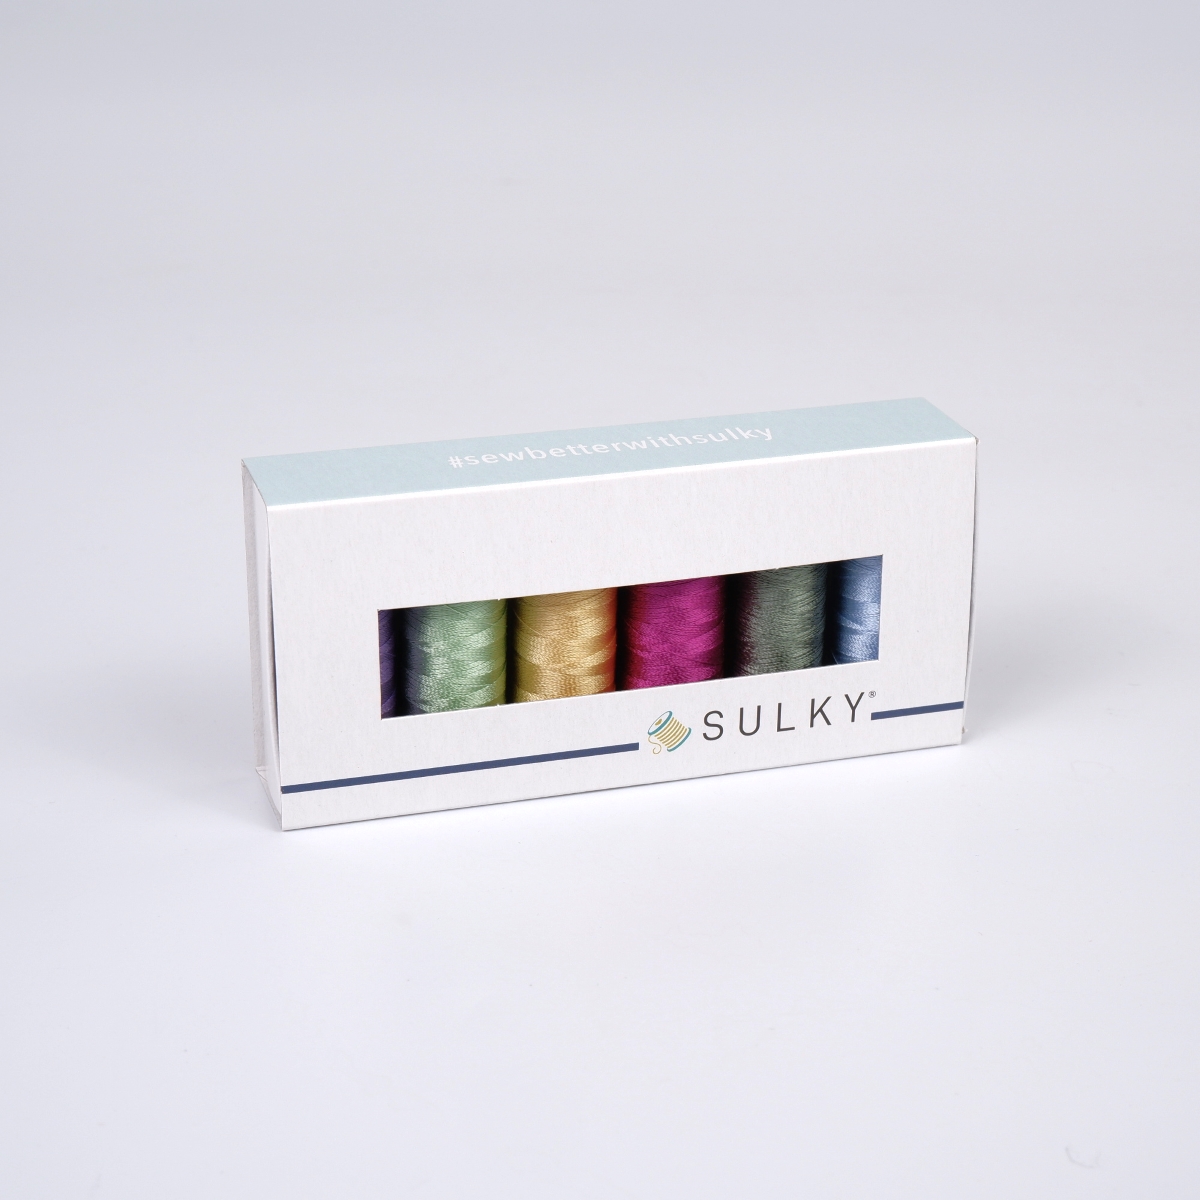 SULKY RAYON 40 - ROSEWOOD (6x 225m
Snap Spulen)